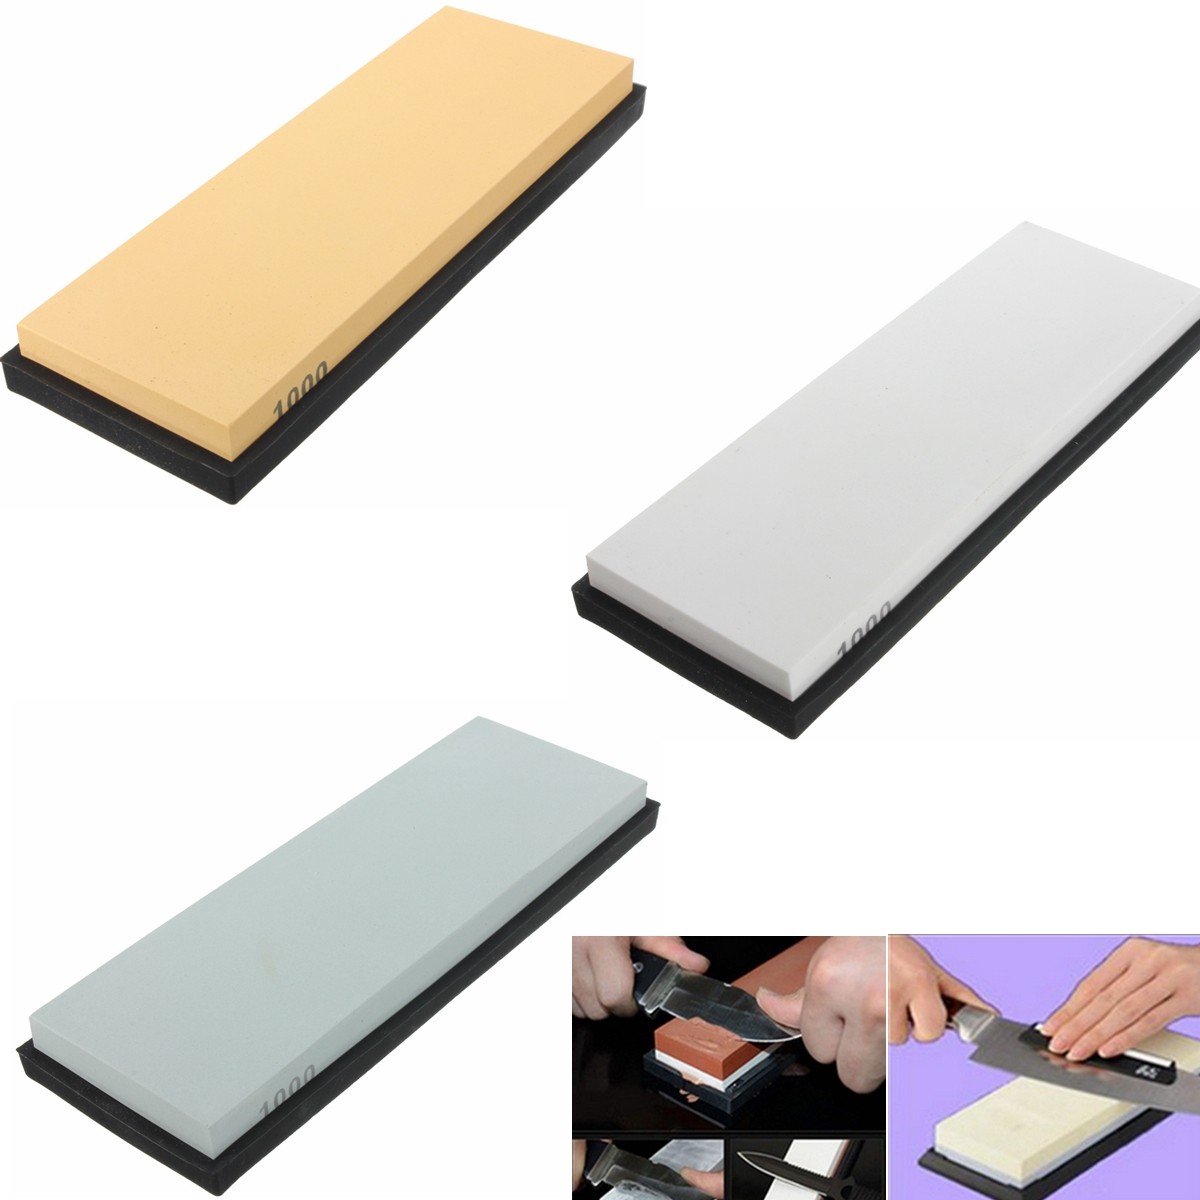 1000-Grit-Whetstone-Sharpener-Sharpen-Stone-With-Stand-180mm-x-60mm-x-15mm-1324622-1